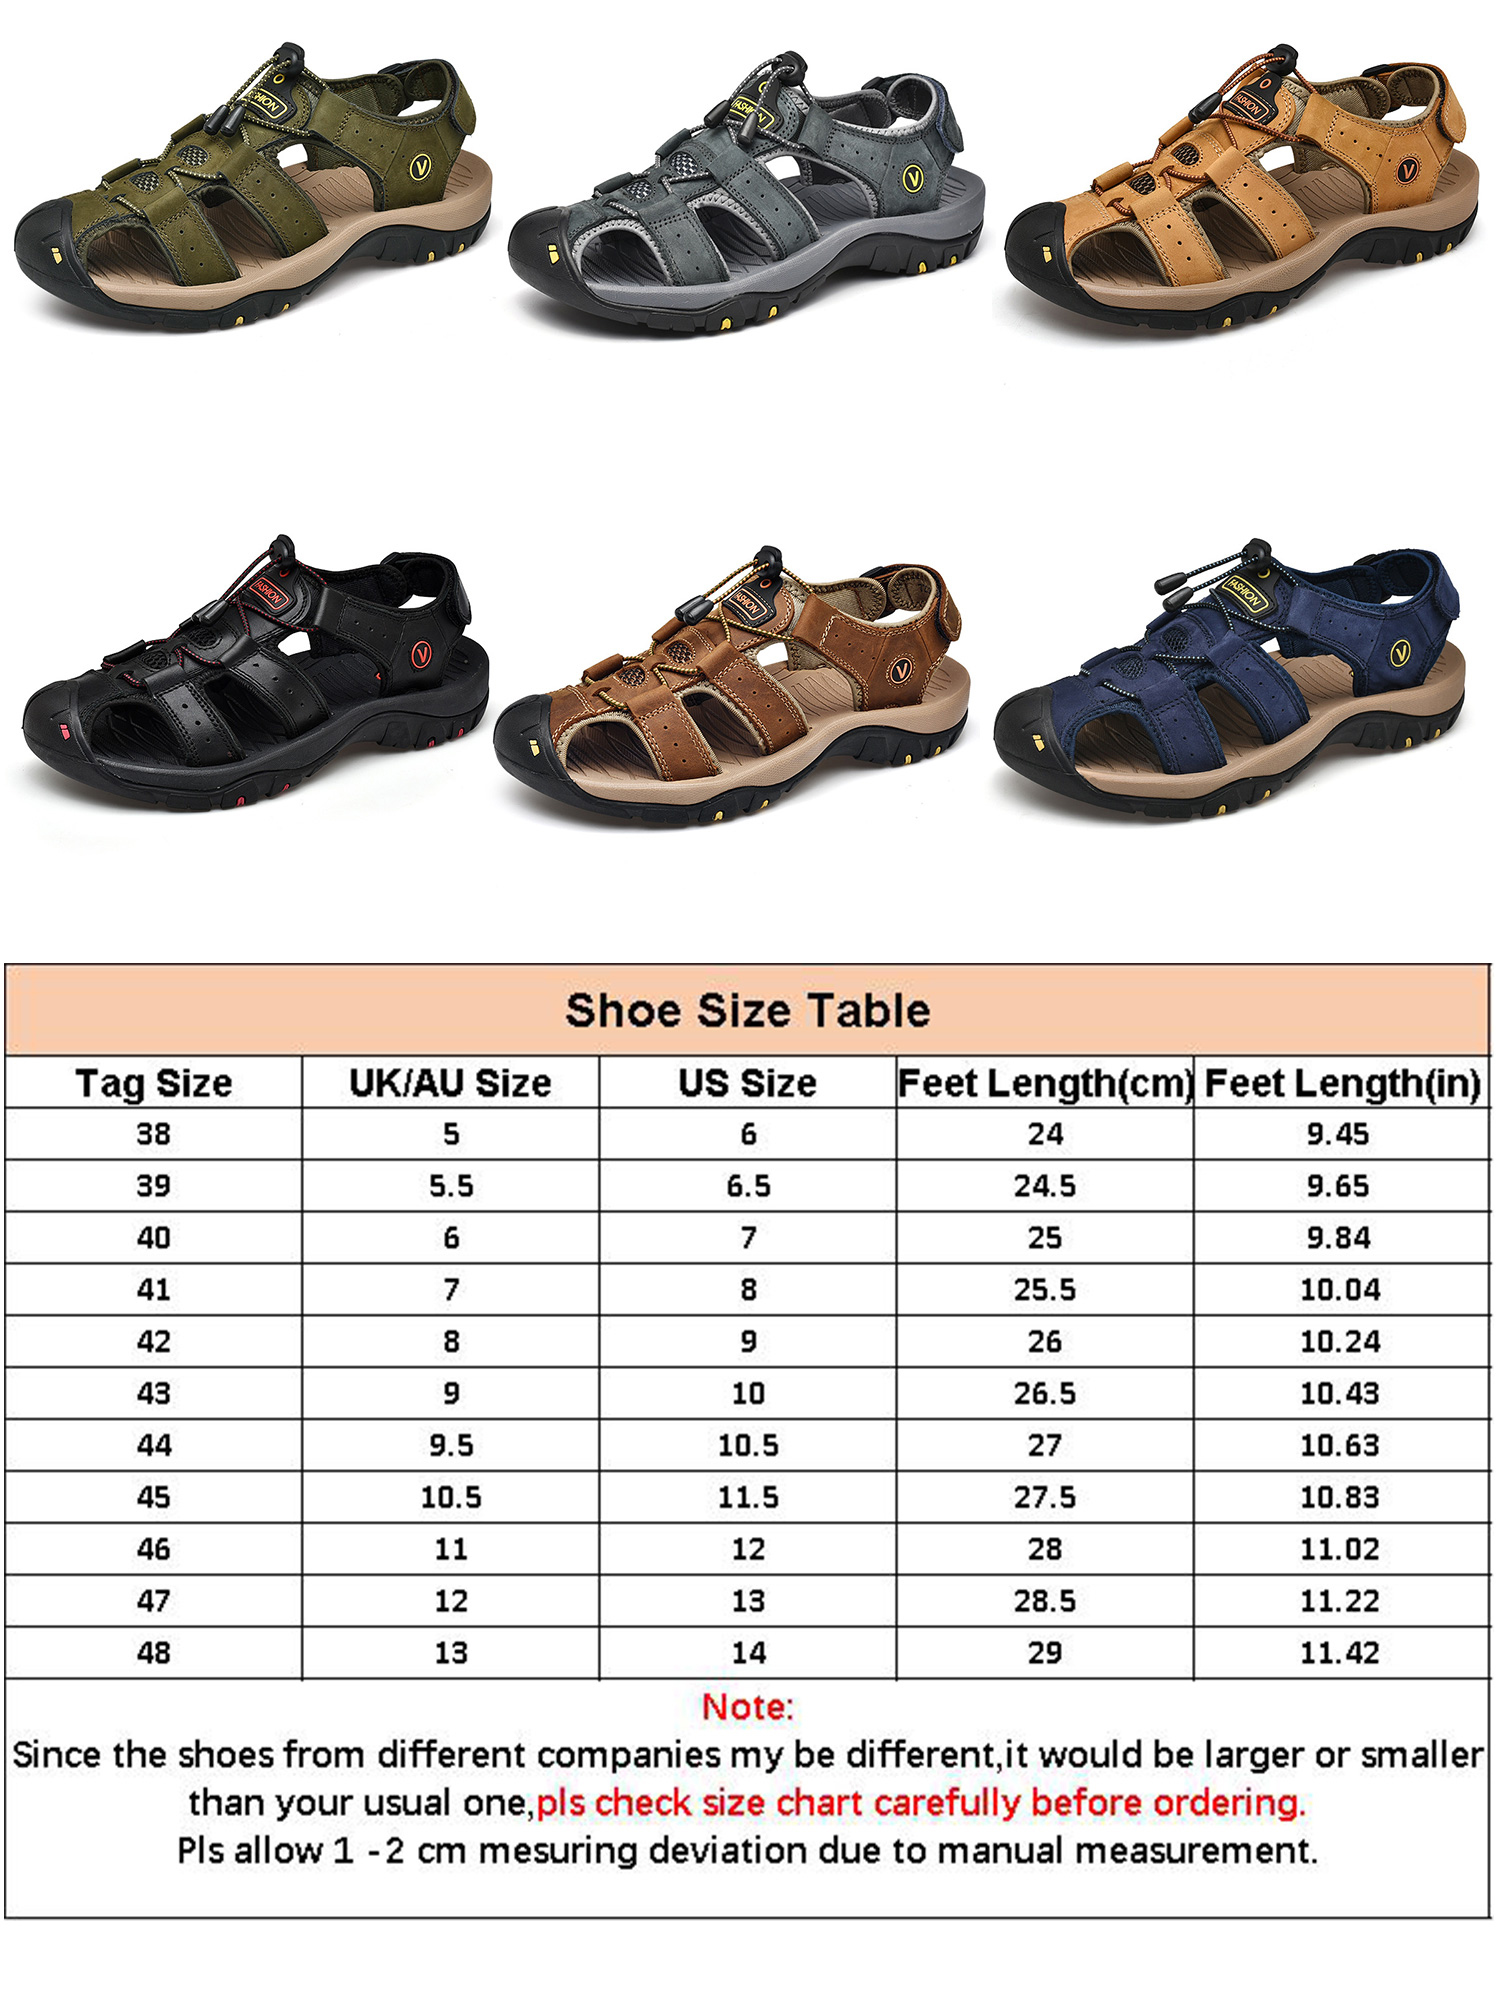 Lacyhop Fisherman Beach Sandals for Men Comfortable Closed Toe Flat Sandal for Athletic Walking - image 2 of 5